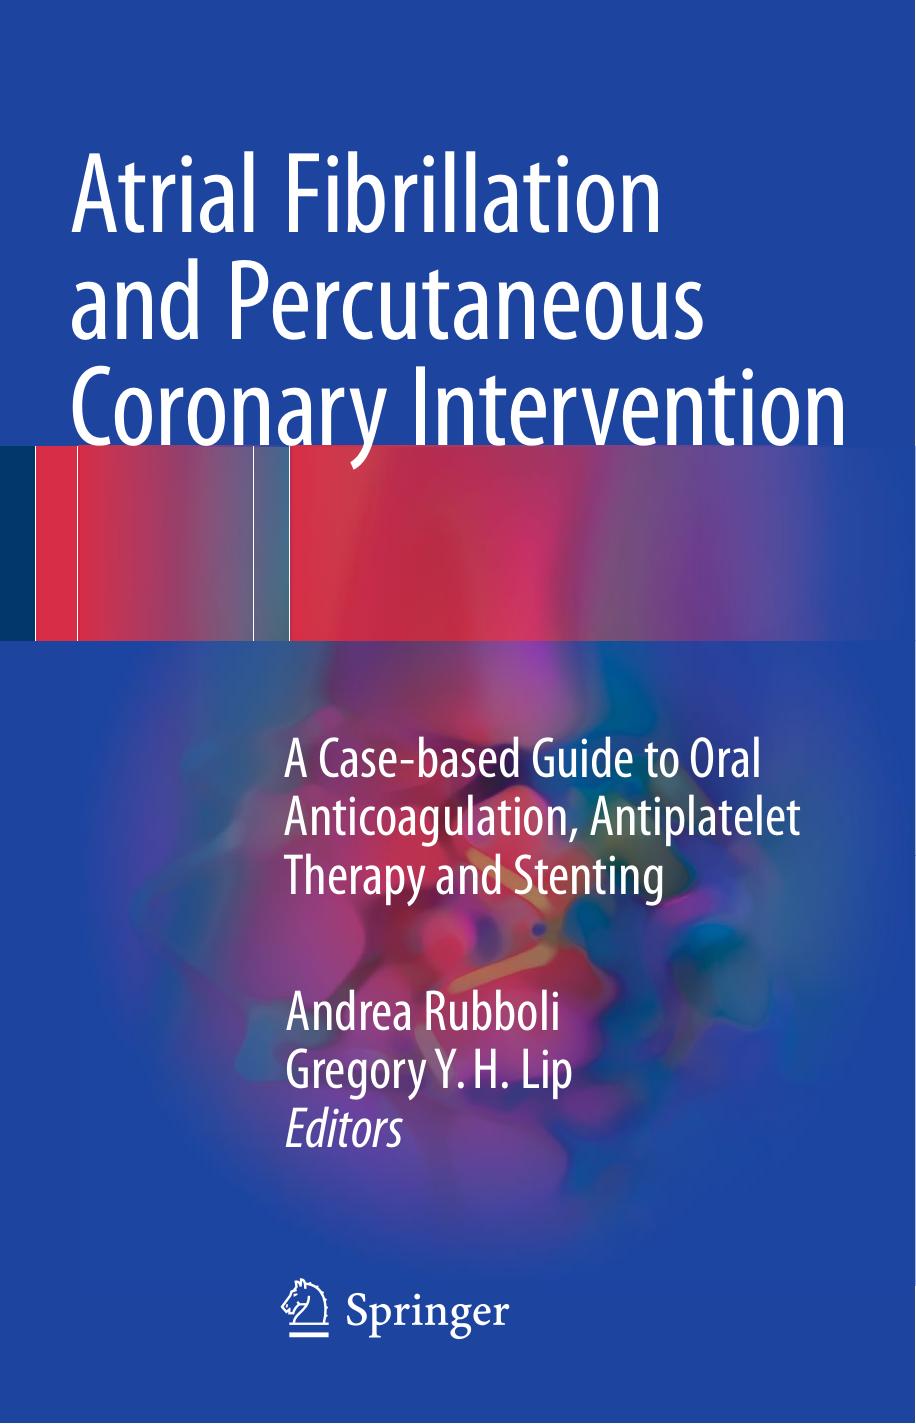 Atrial Fibrillation and Percutaneous Coronary Intervention A Case-based Guide to Oral Anticoagulation, Antiplatelet Therapy and Stenting